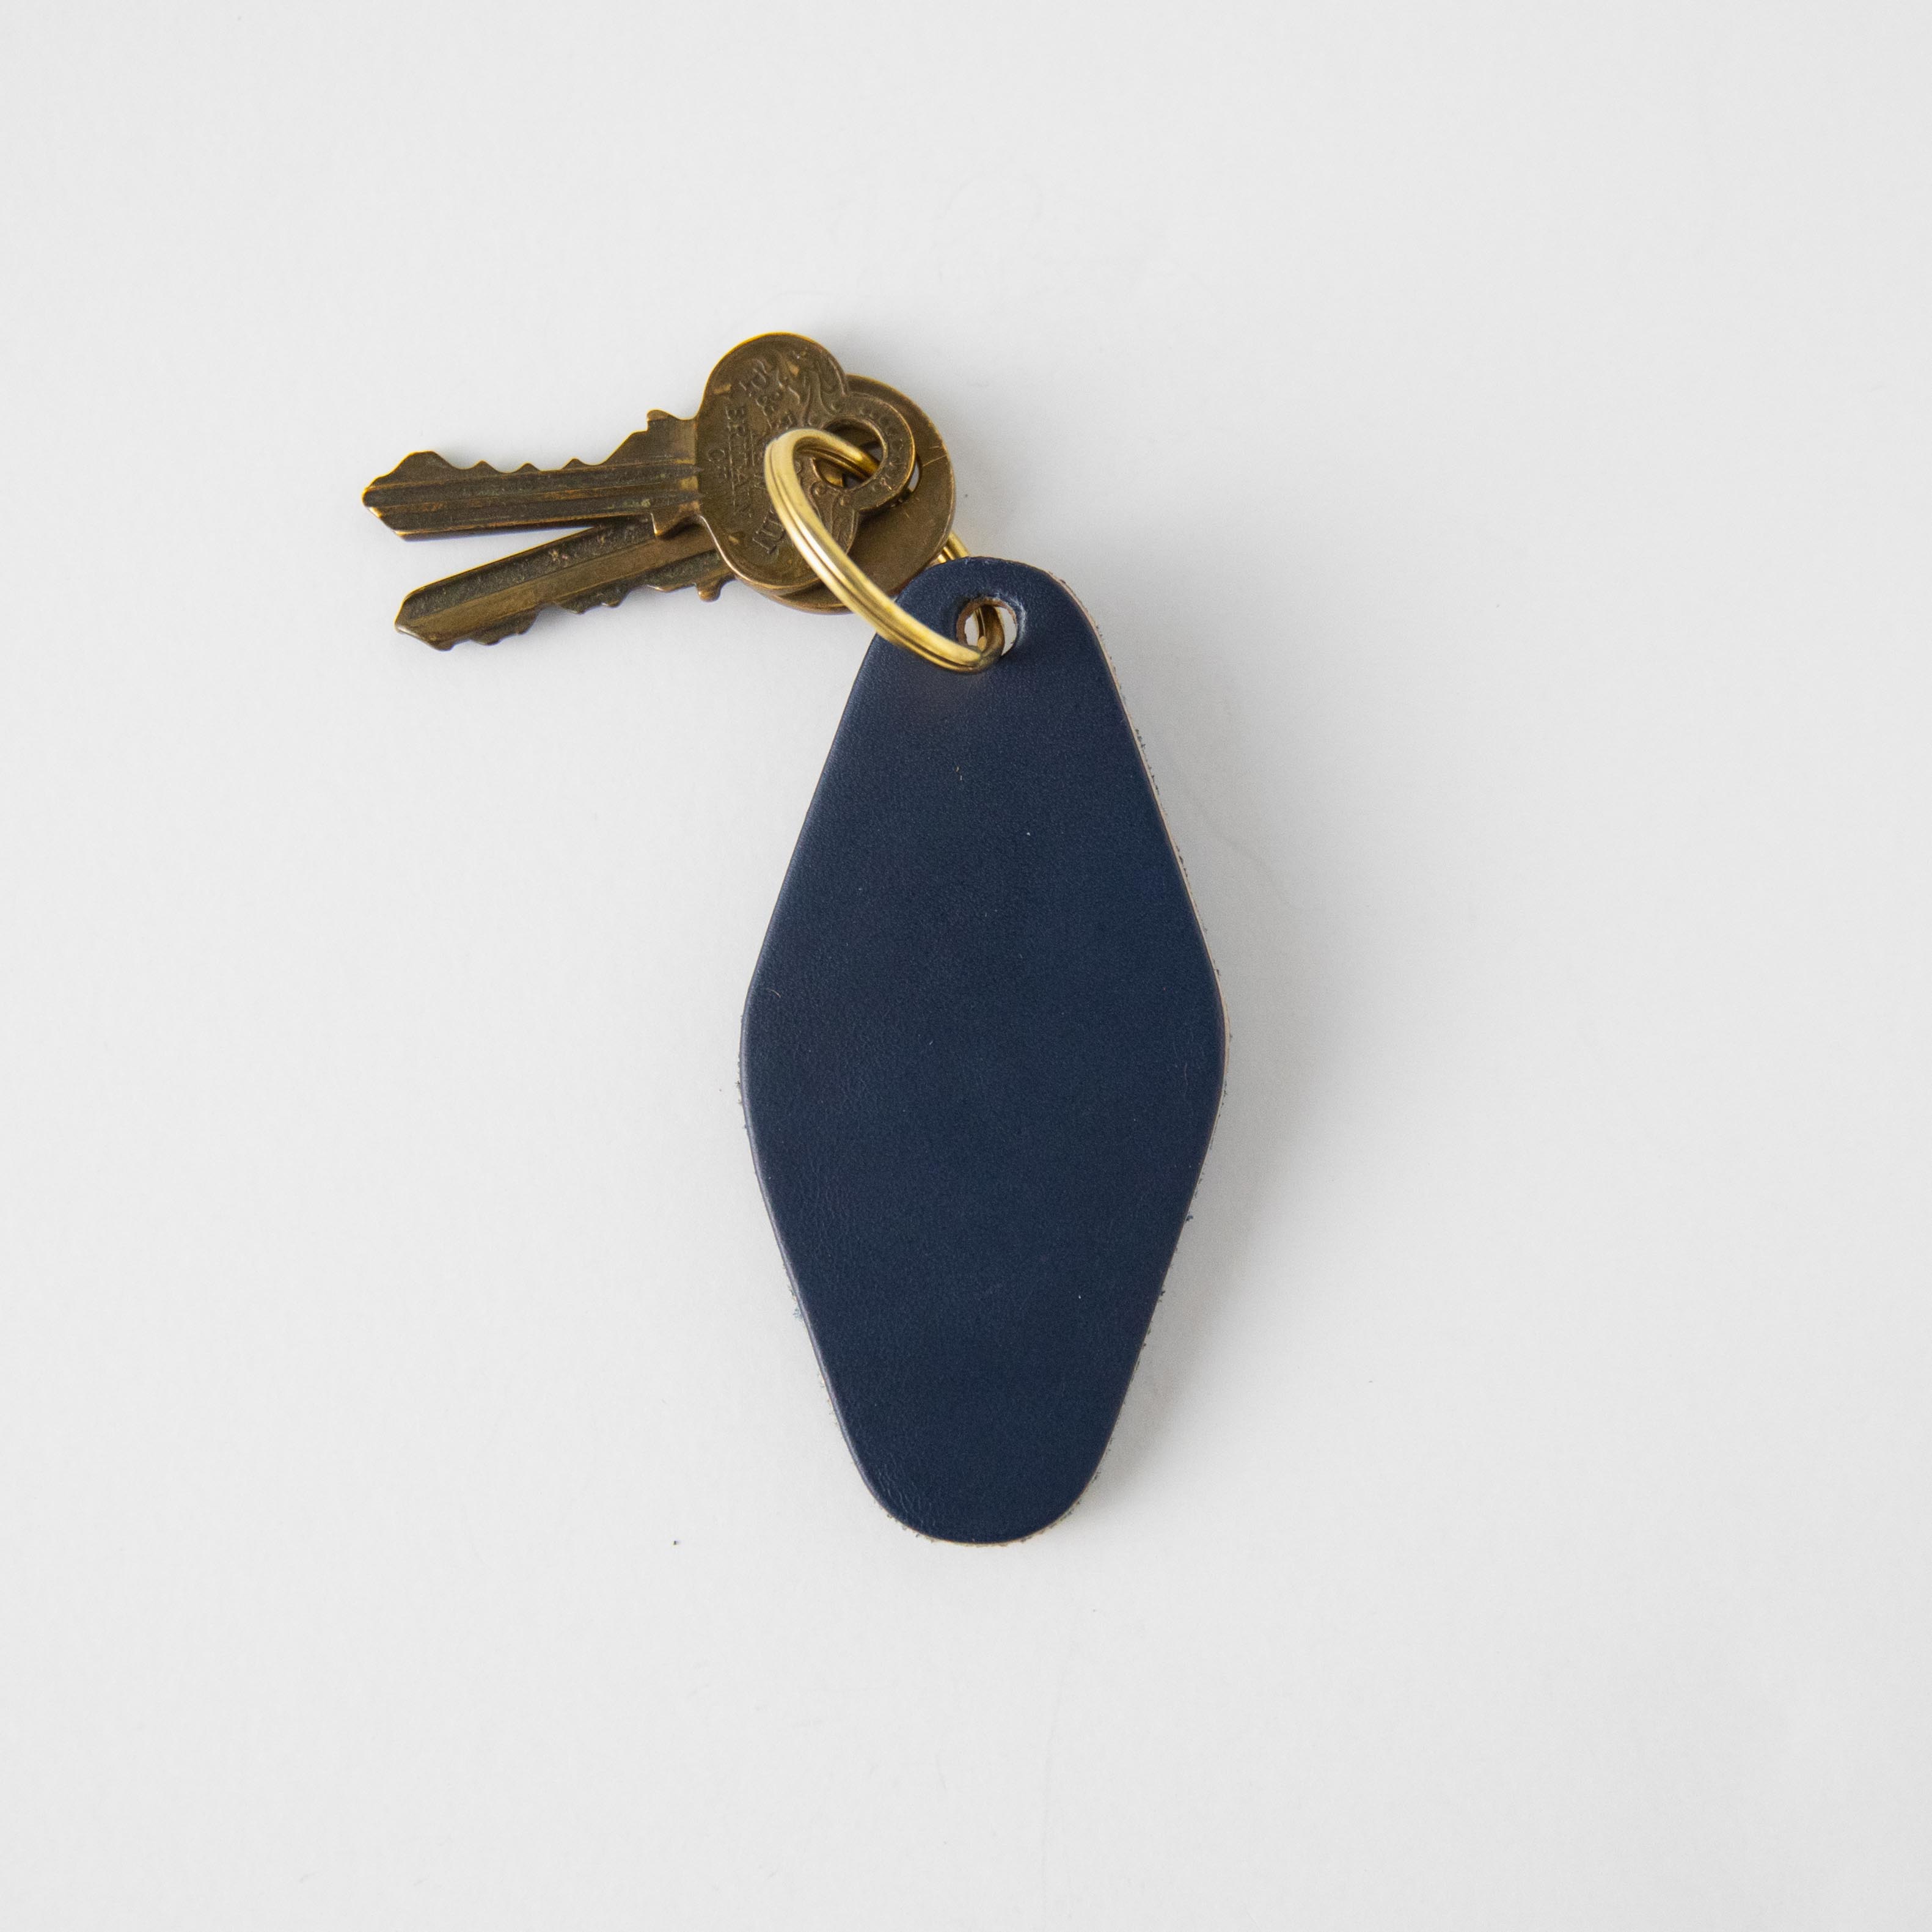 KMM & Co. Leather Keychains